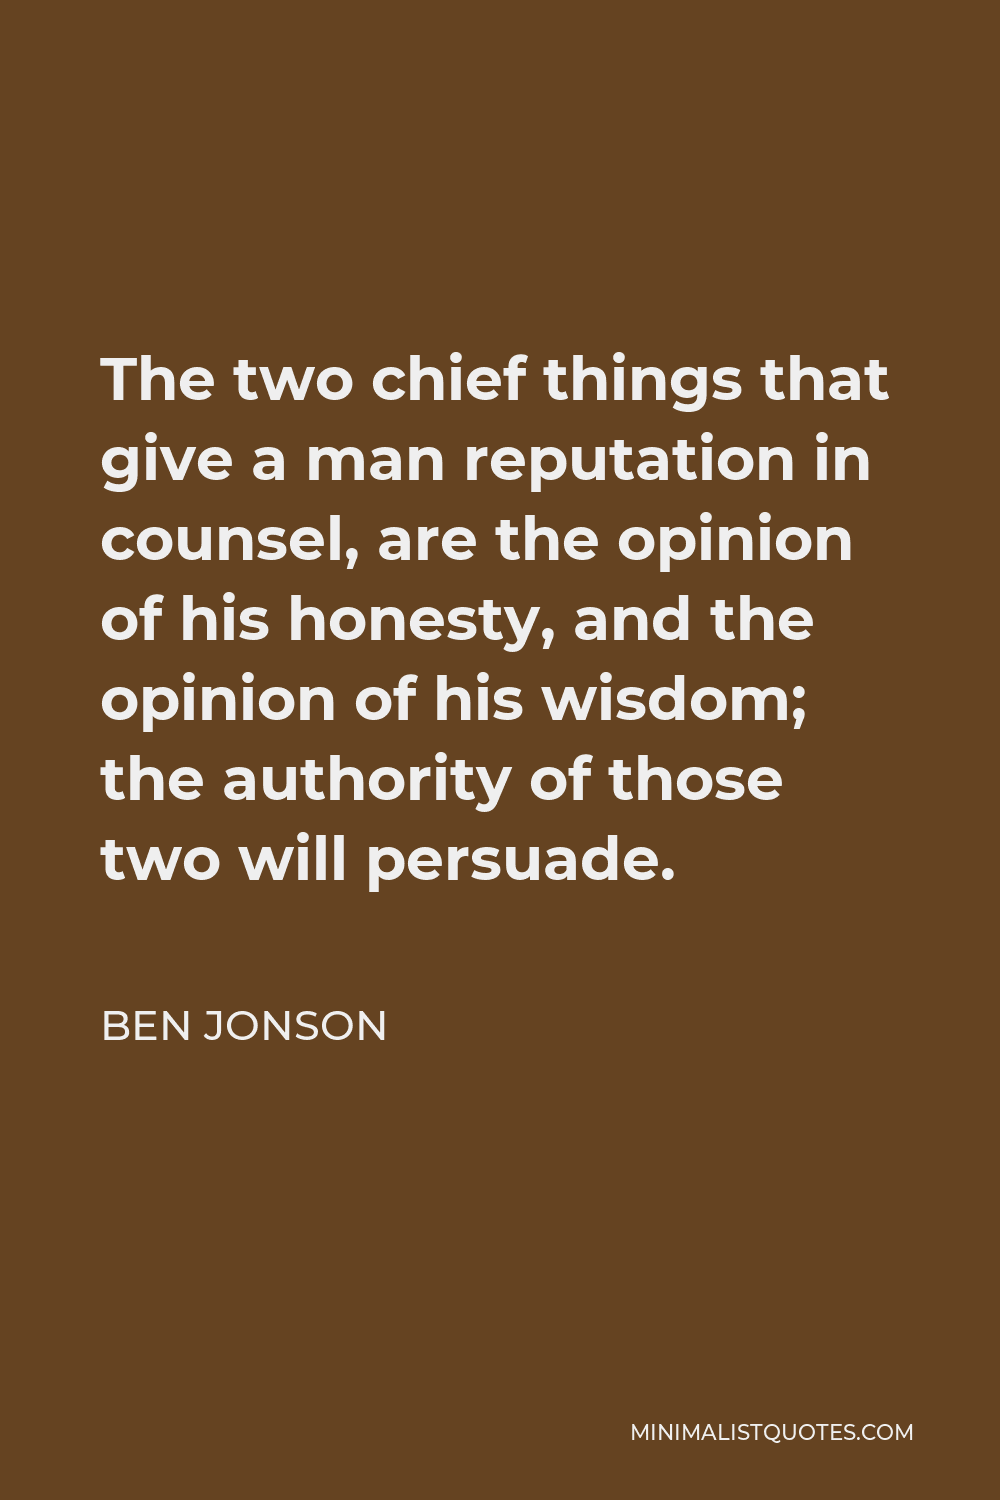 Ben Jonson Quote - The two chief things that give a man reputation in counsel, are the opinion of his honesty, and the opinion of his wisdom; the authority of those two will persuade.